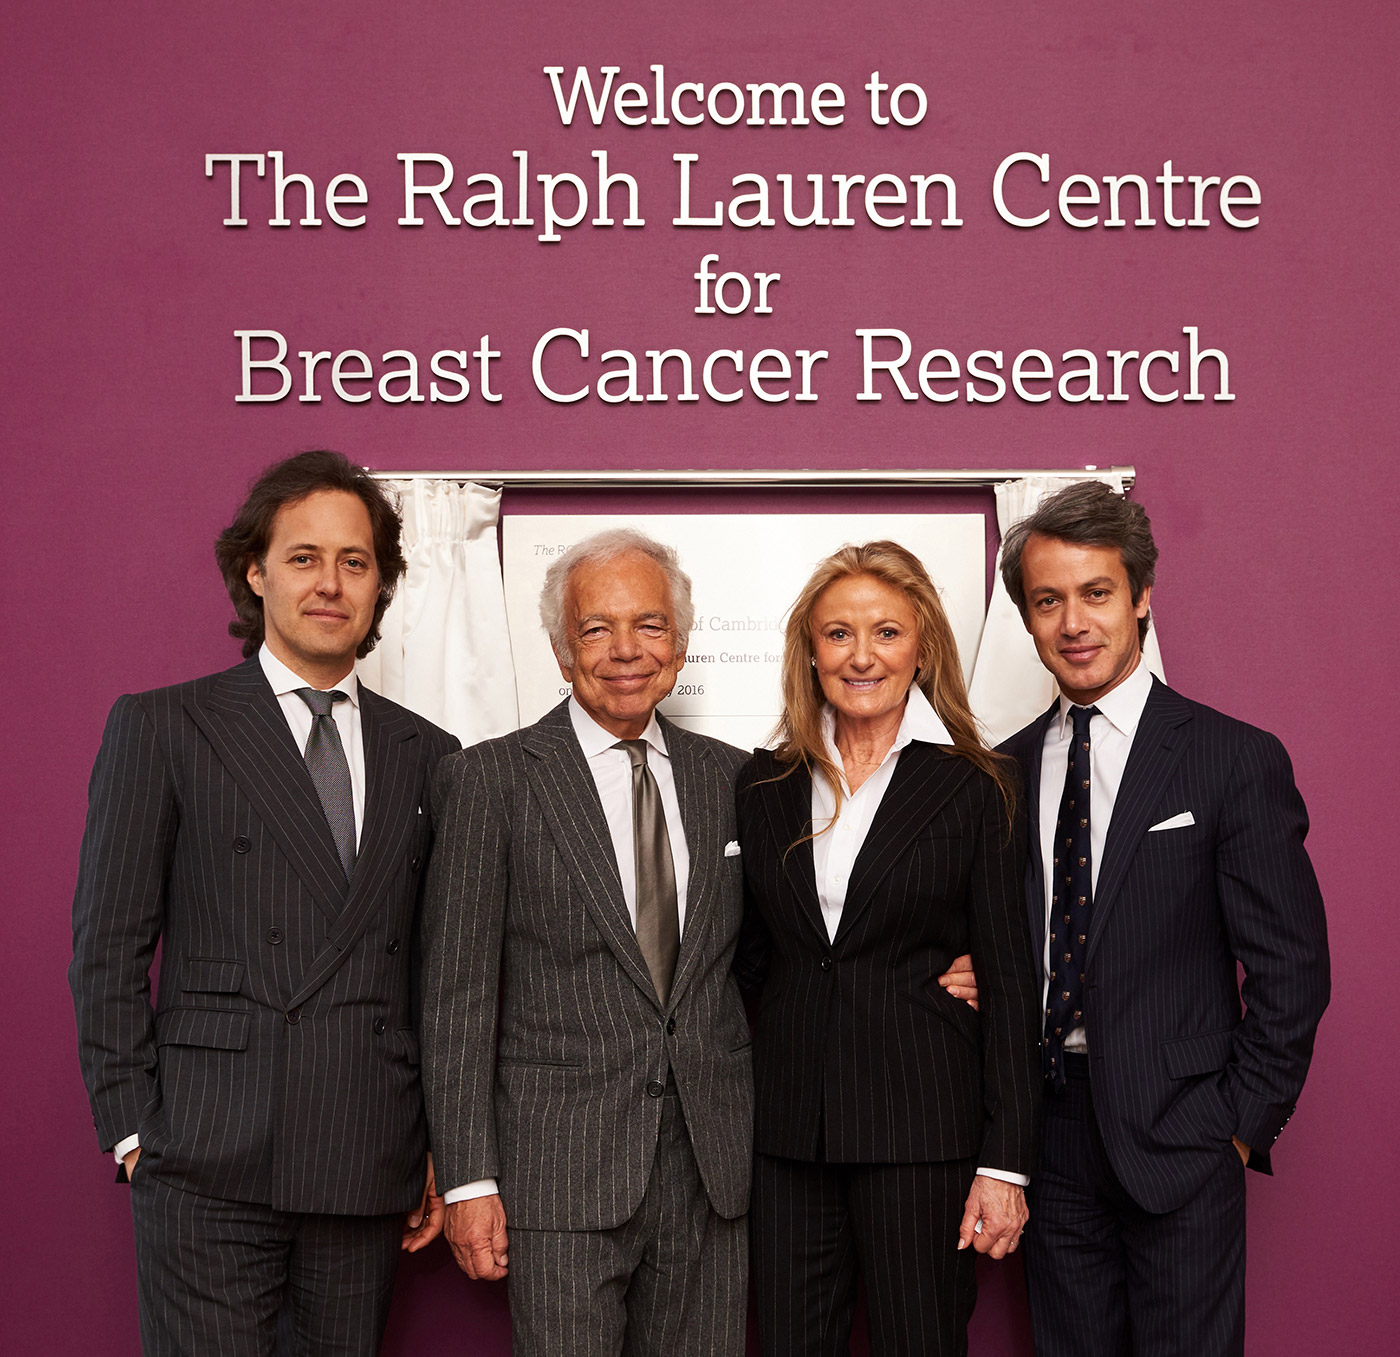                             (Left to right) David, Ralph, Ricky, and Andrew Lauren at the unveiling of The Royal Marsden&#x2019;s new breast cancer research center